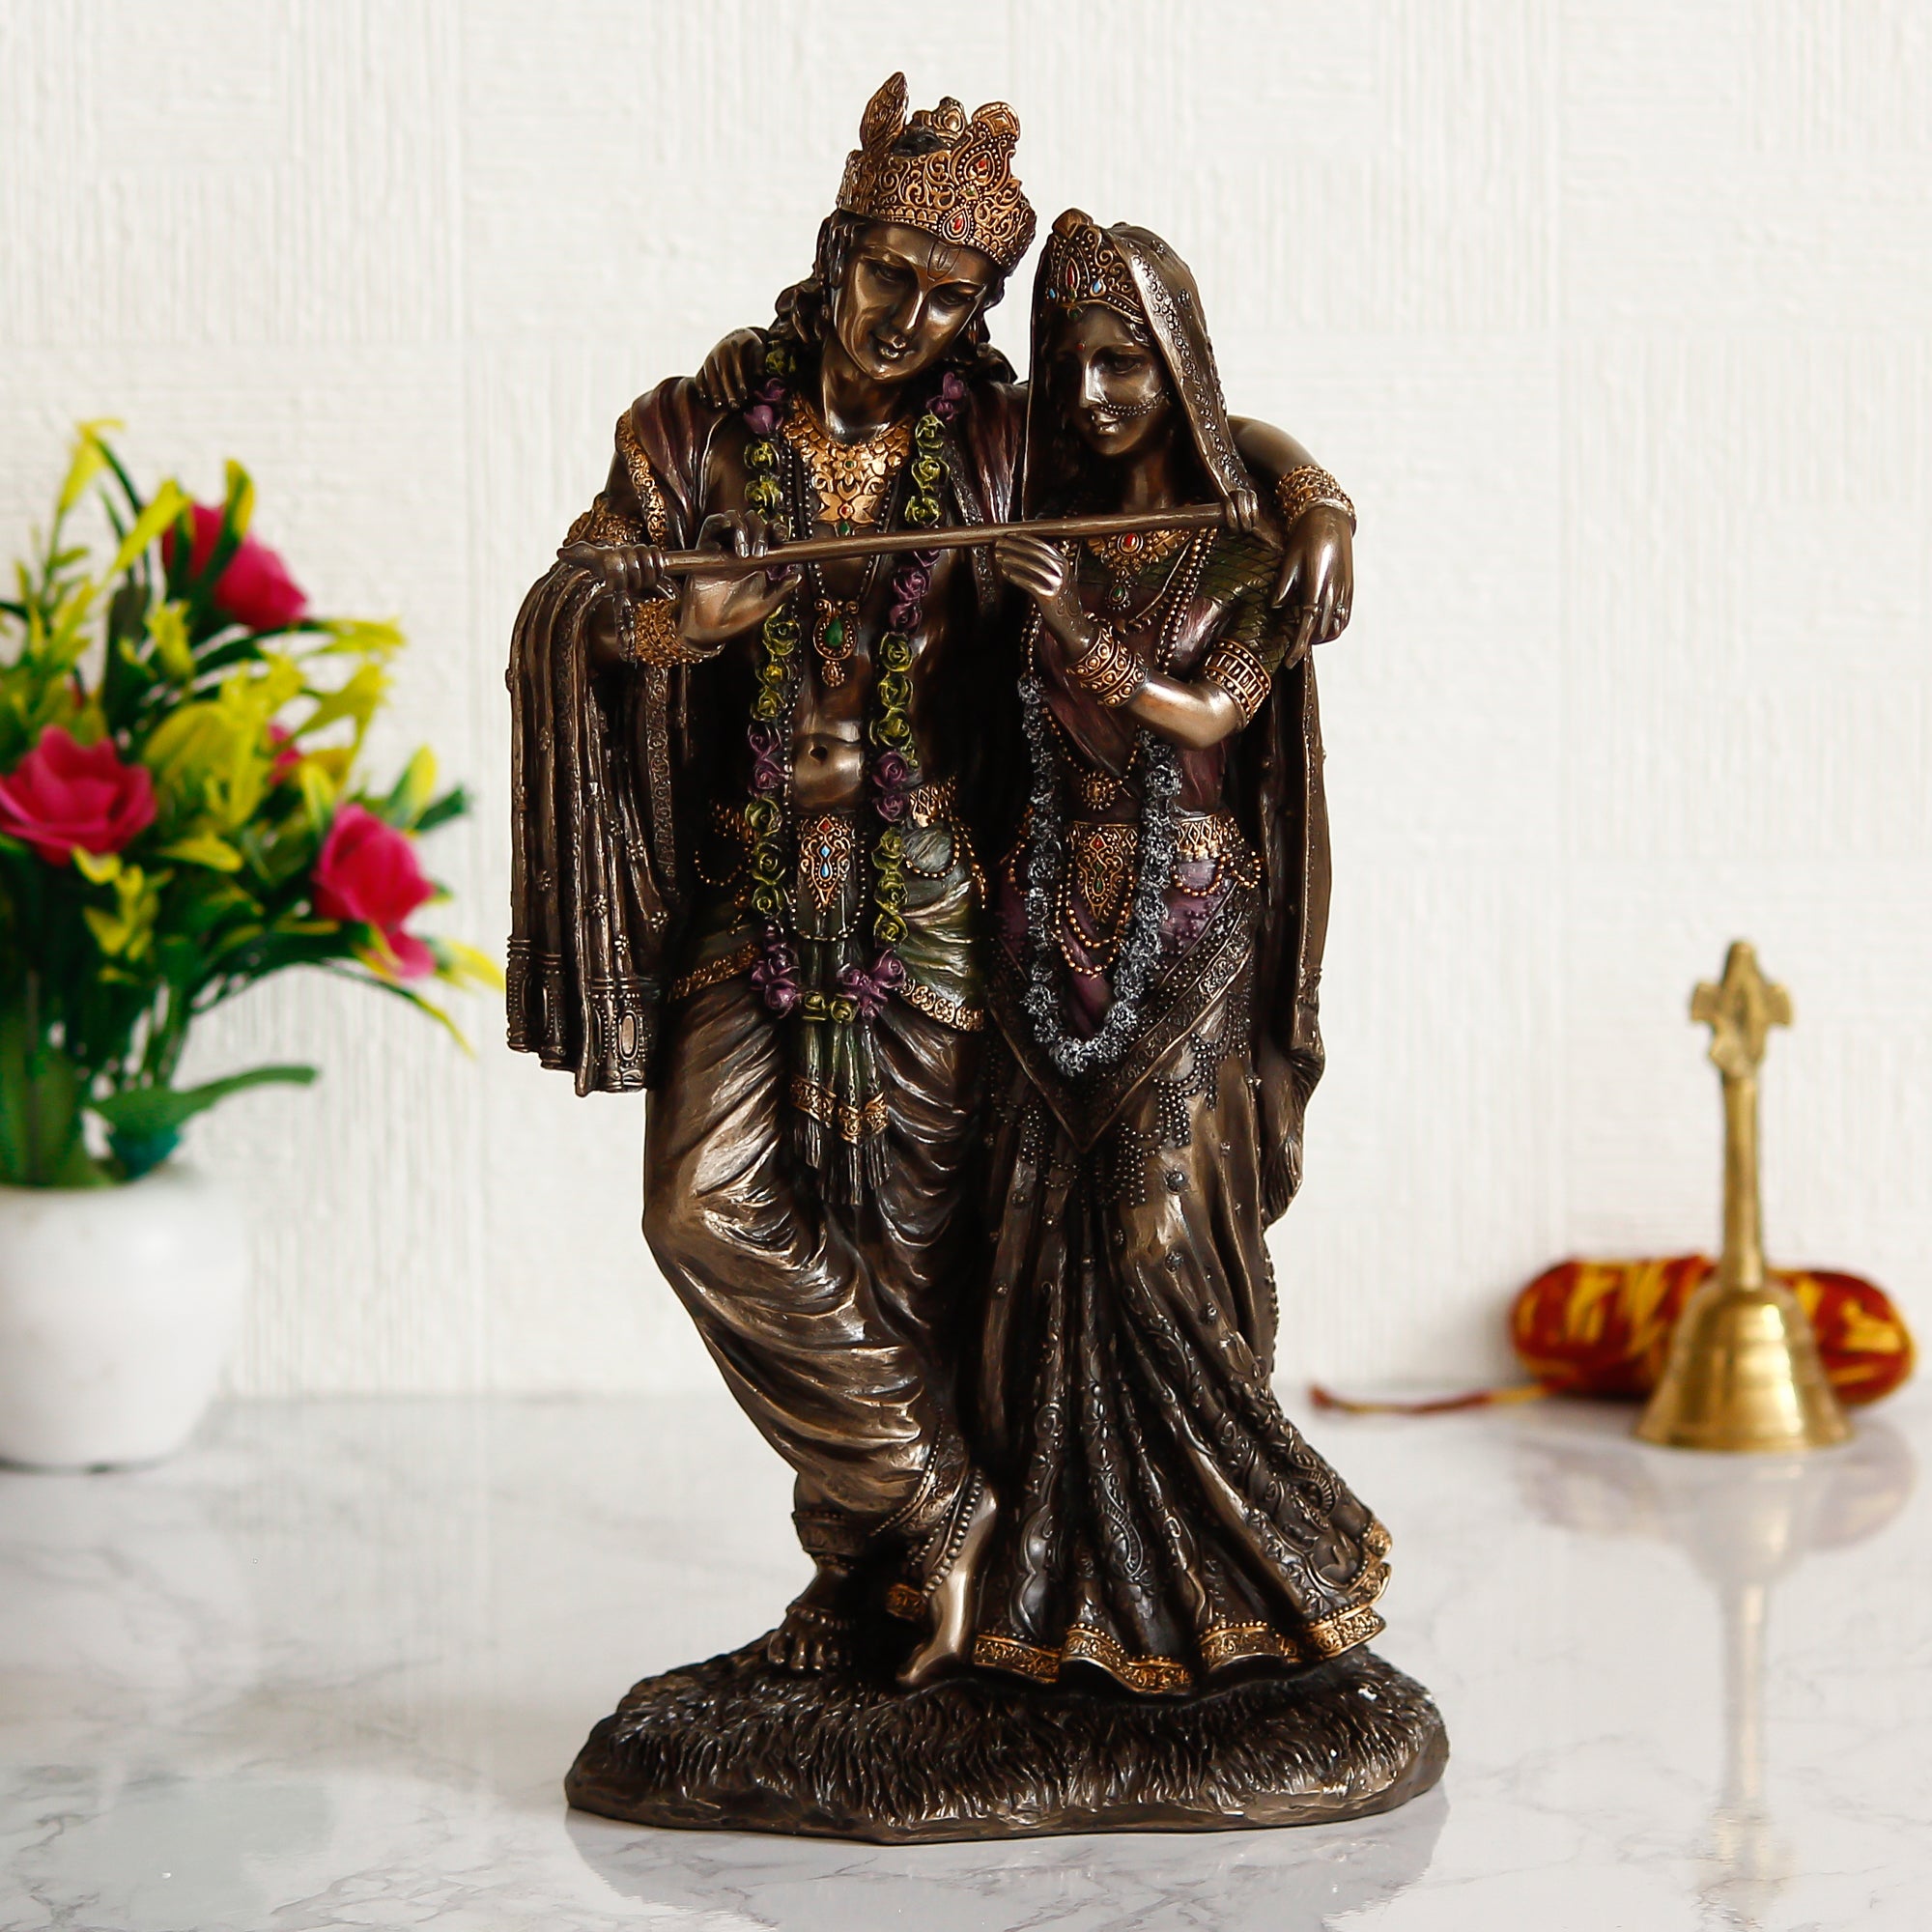 Polyresin and Bronze Decorative Radha Krishna Playing Flute Statue (Brown and Golden)